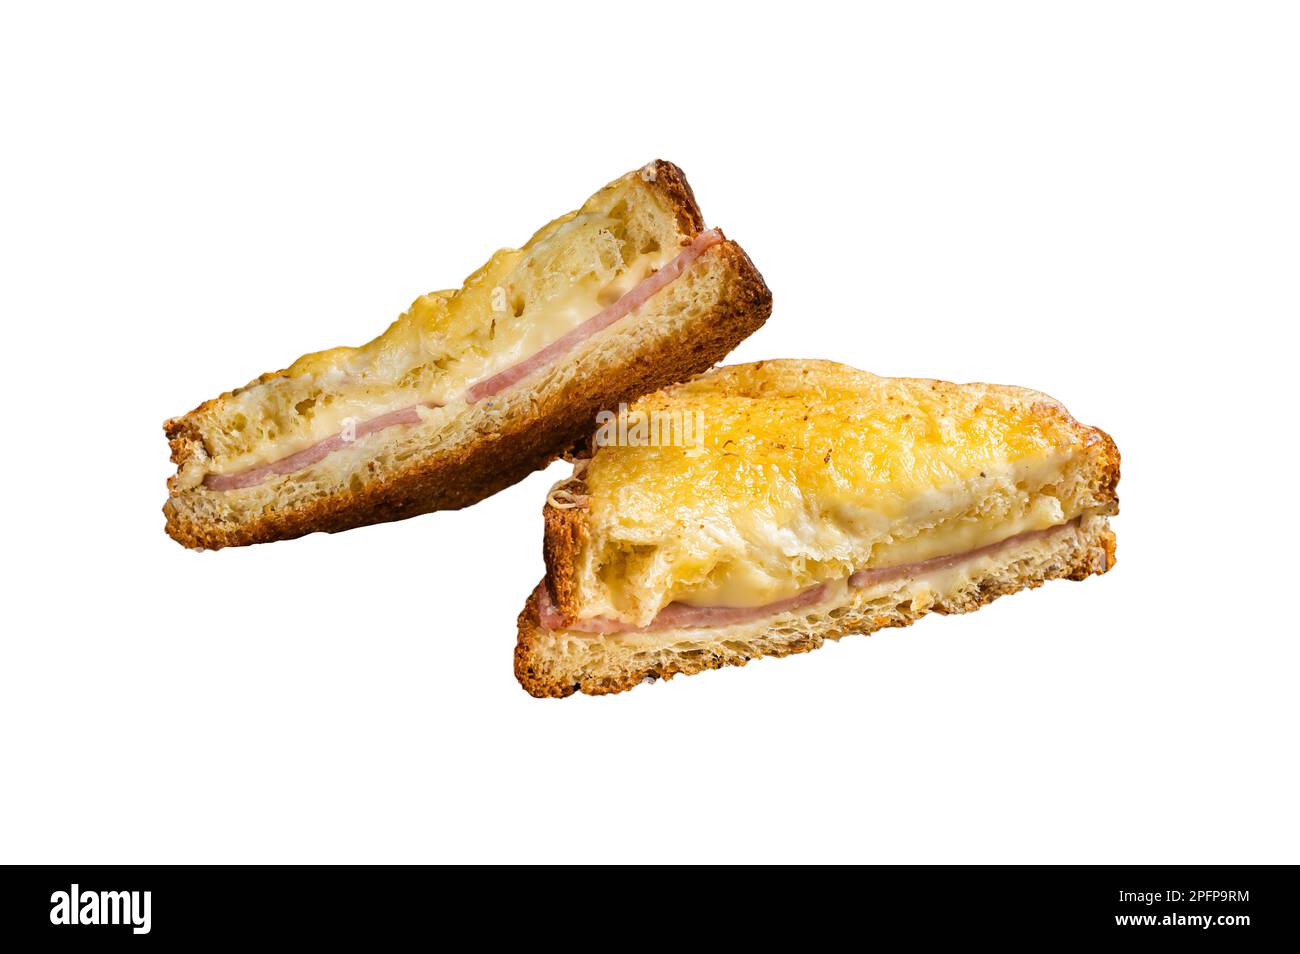 French toasts Croque monsieur and croque madame, grilled sandwiches on brioch bread with sliced ham, melted emmental cheese and egg. Isolated on white Stock Photo